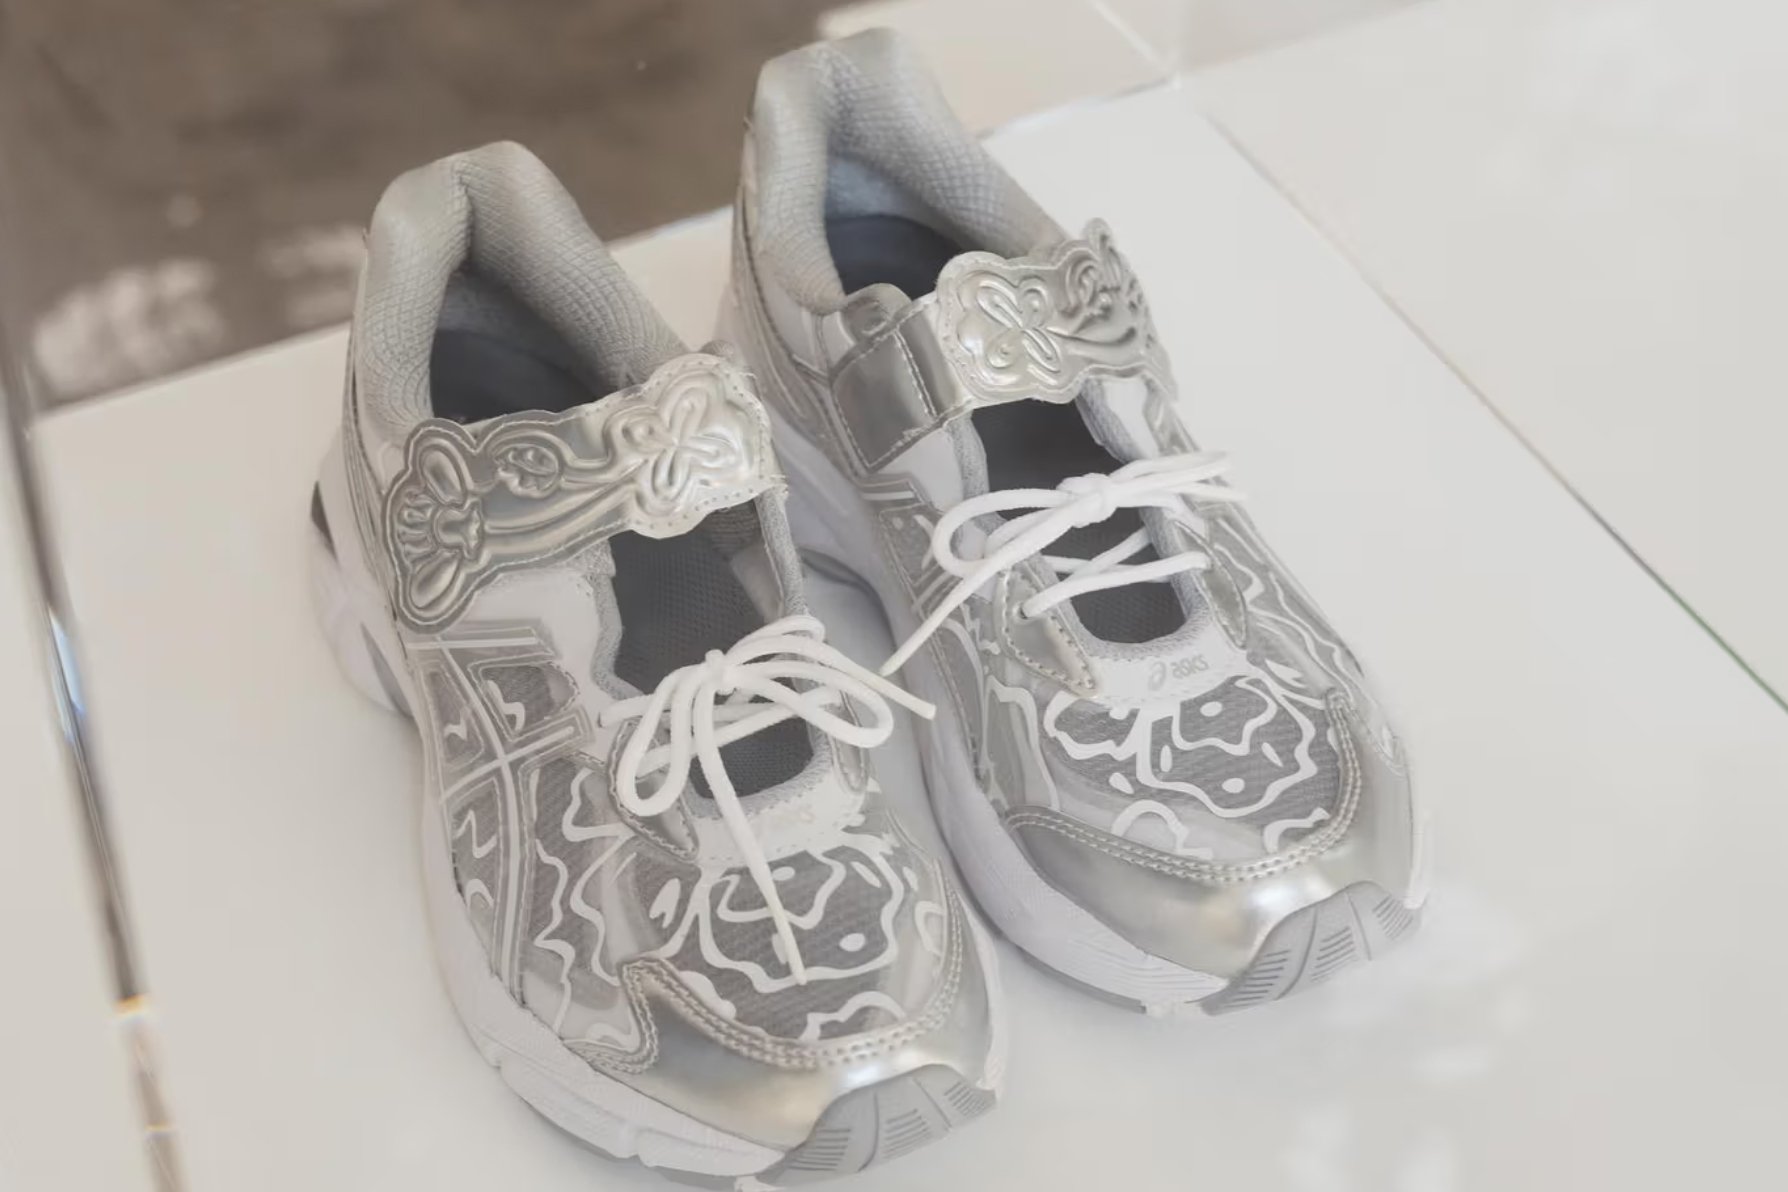 Cecilie Bahnsen Spotlights Her Couture Designs With Latest ASICS GT-2160 Collaboration